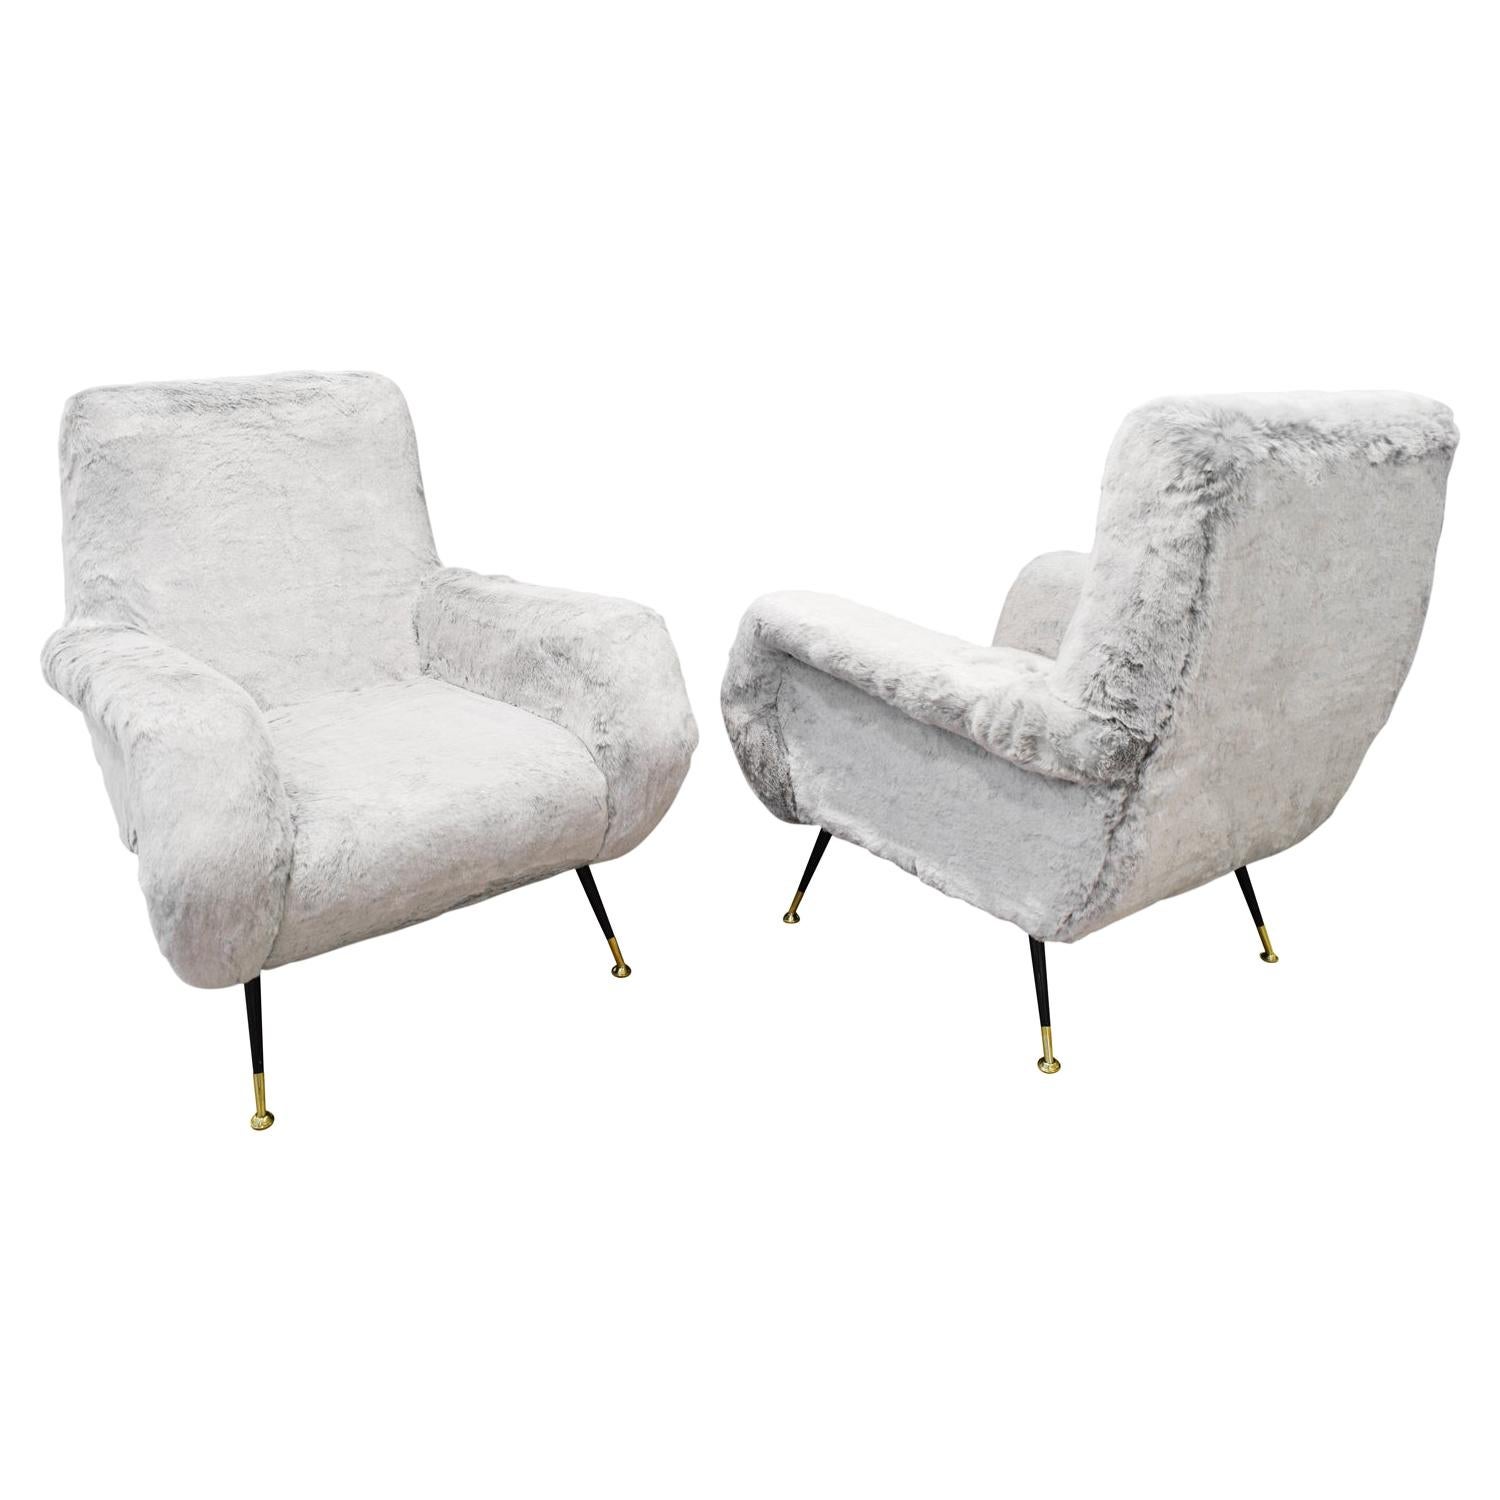 Pair of Sculptural Italian Lounge Chairs in Faux Fur, 1950s